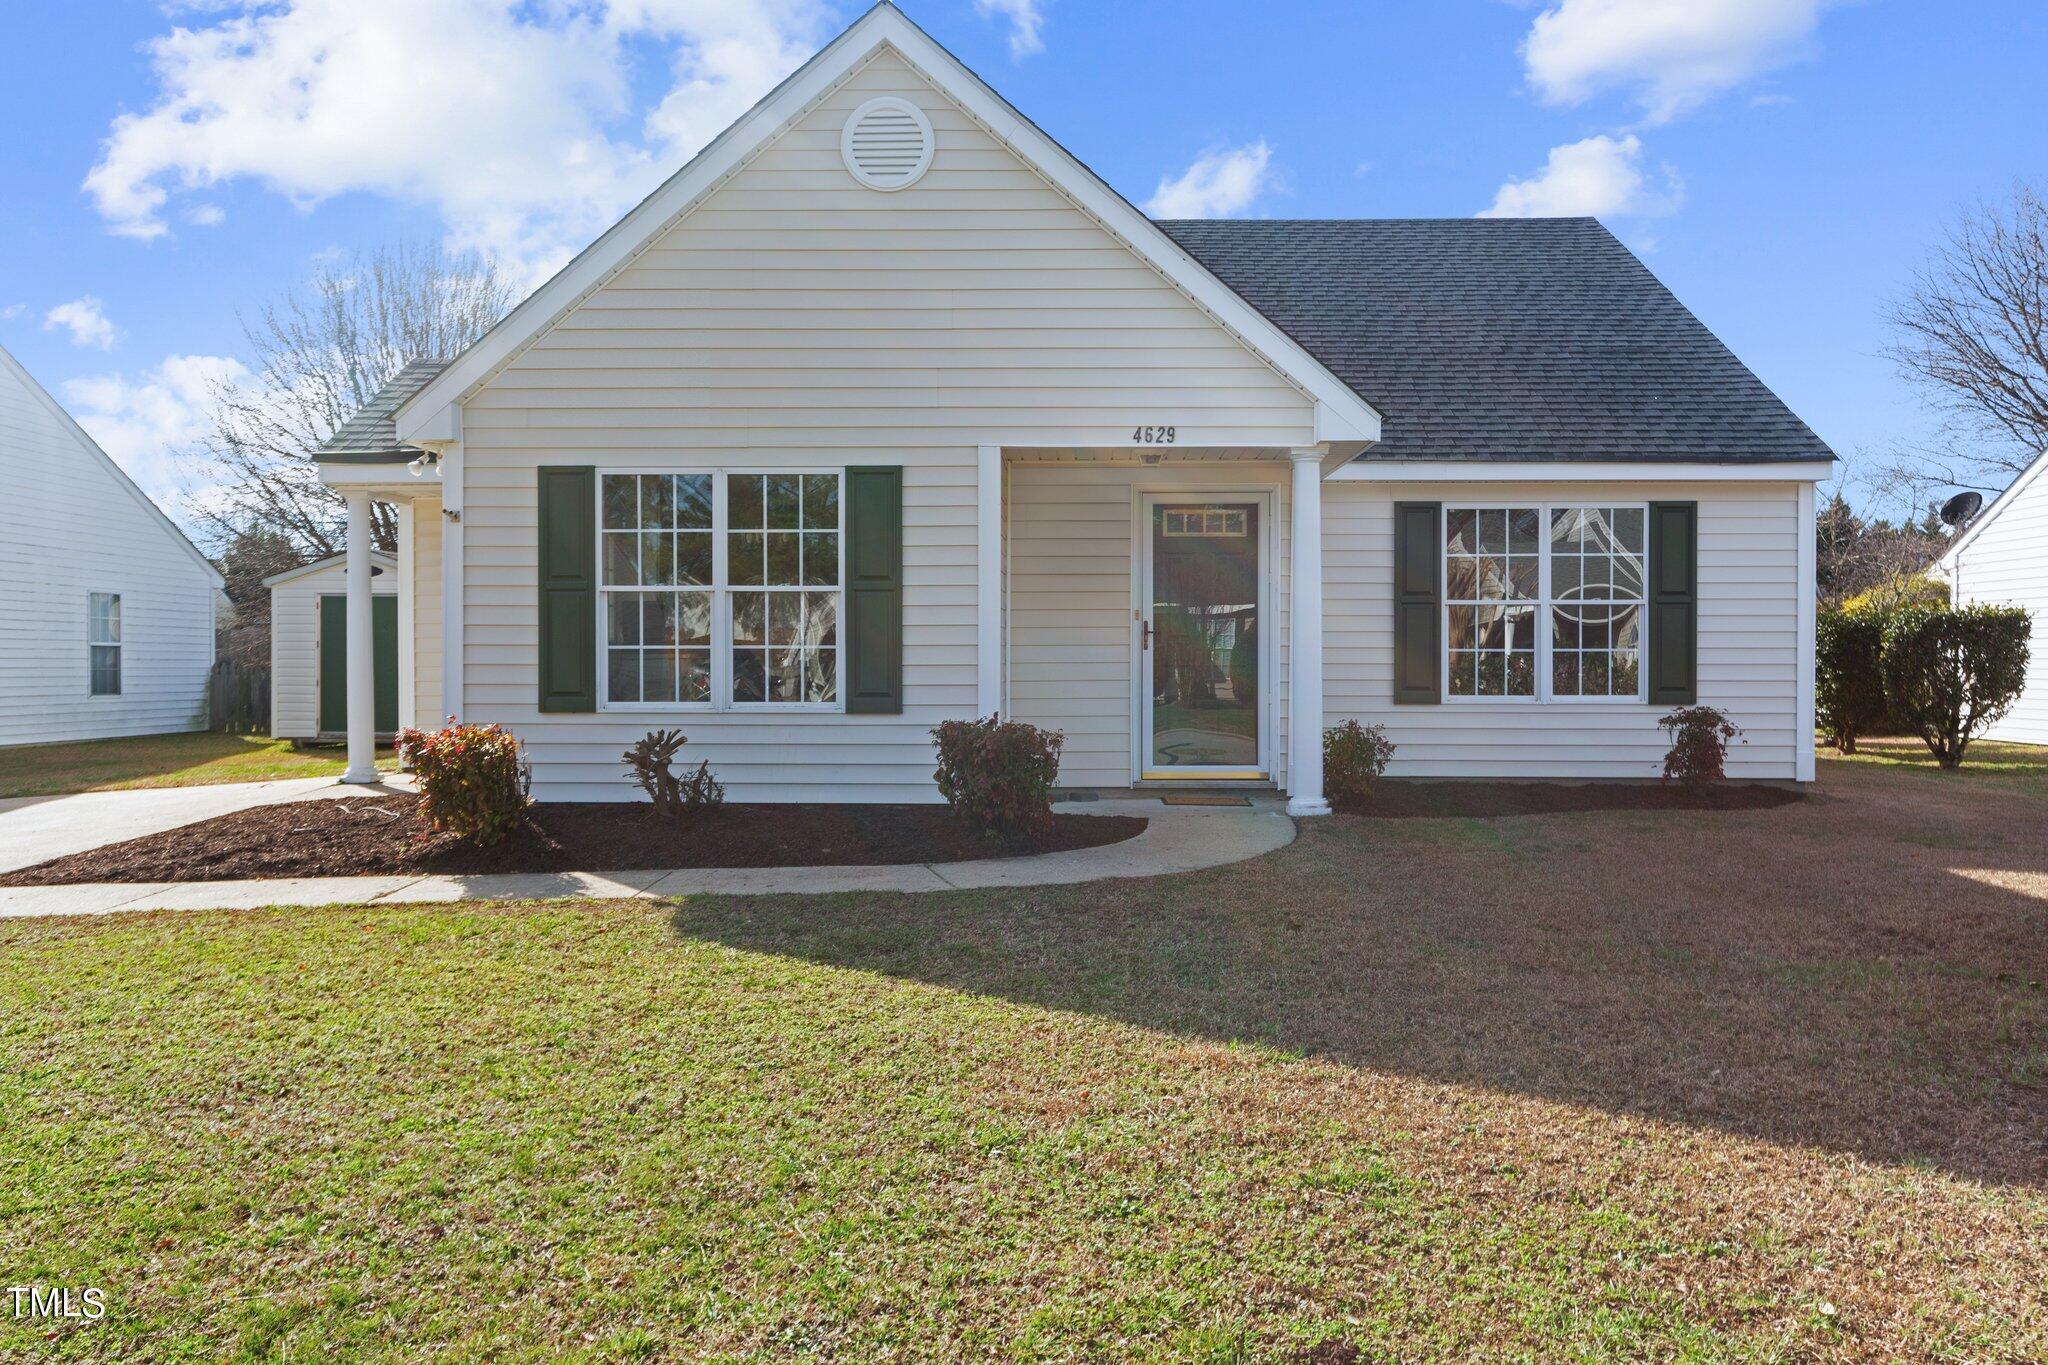 Photo one of 4629 Periwinkle Pl Rocky Mount NC 27804 | MLS 10011707